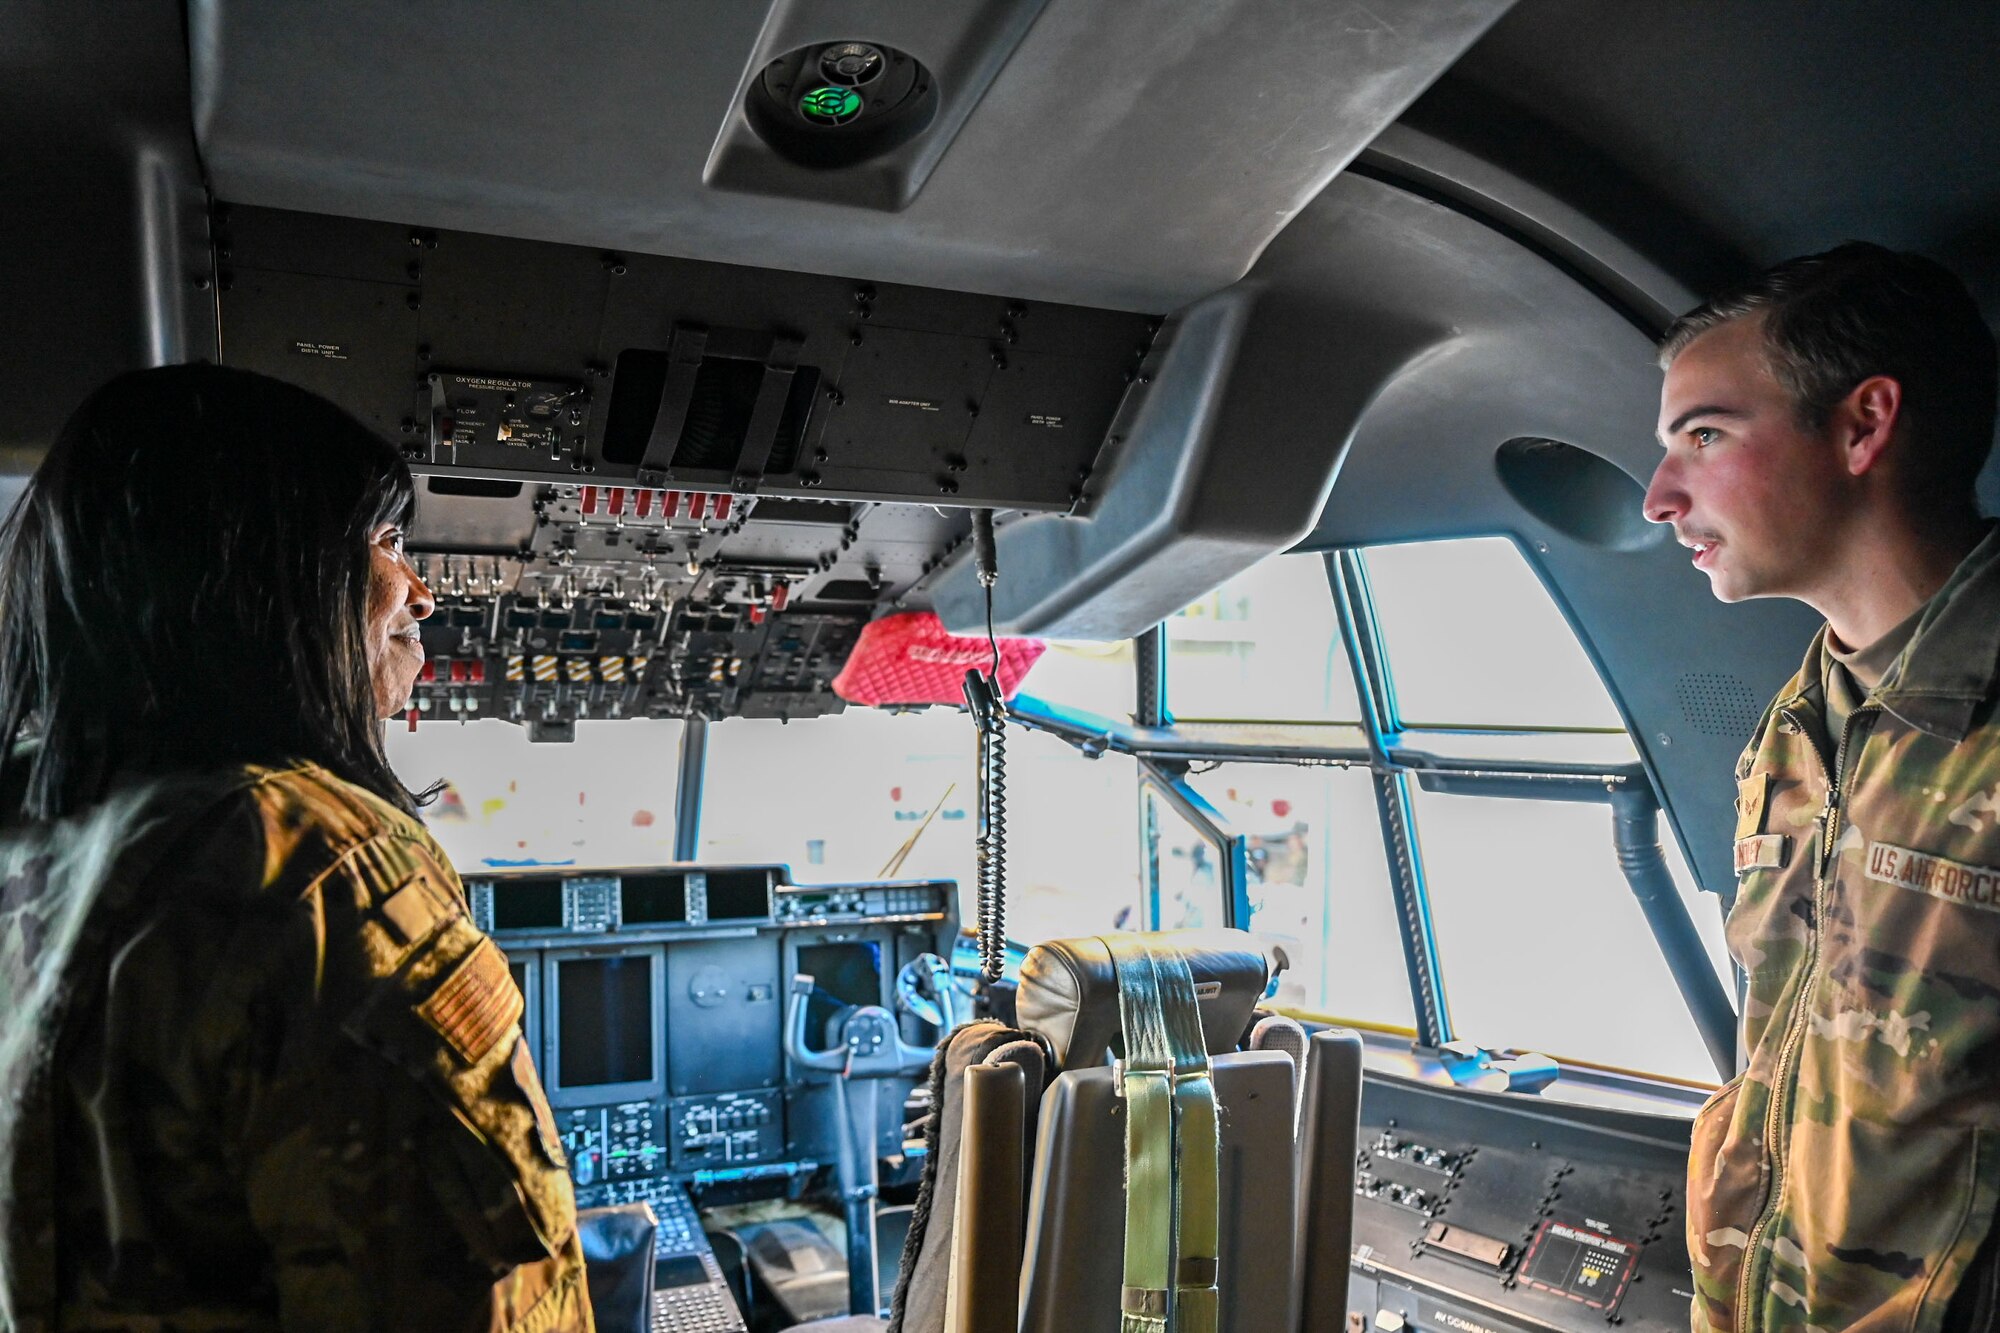 Two U.S. Airmen stand in the cockpit of a C-130J aircraft.